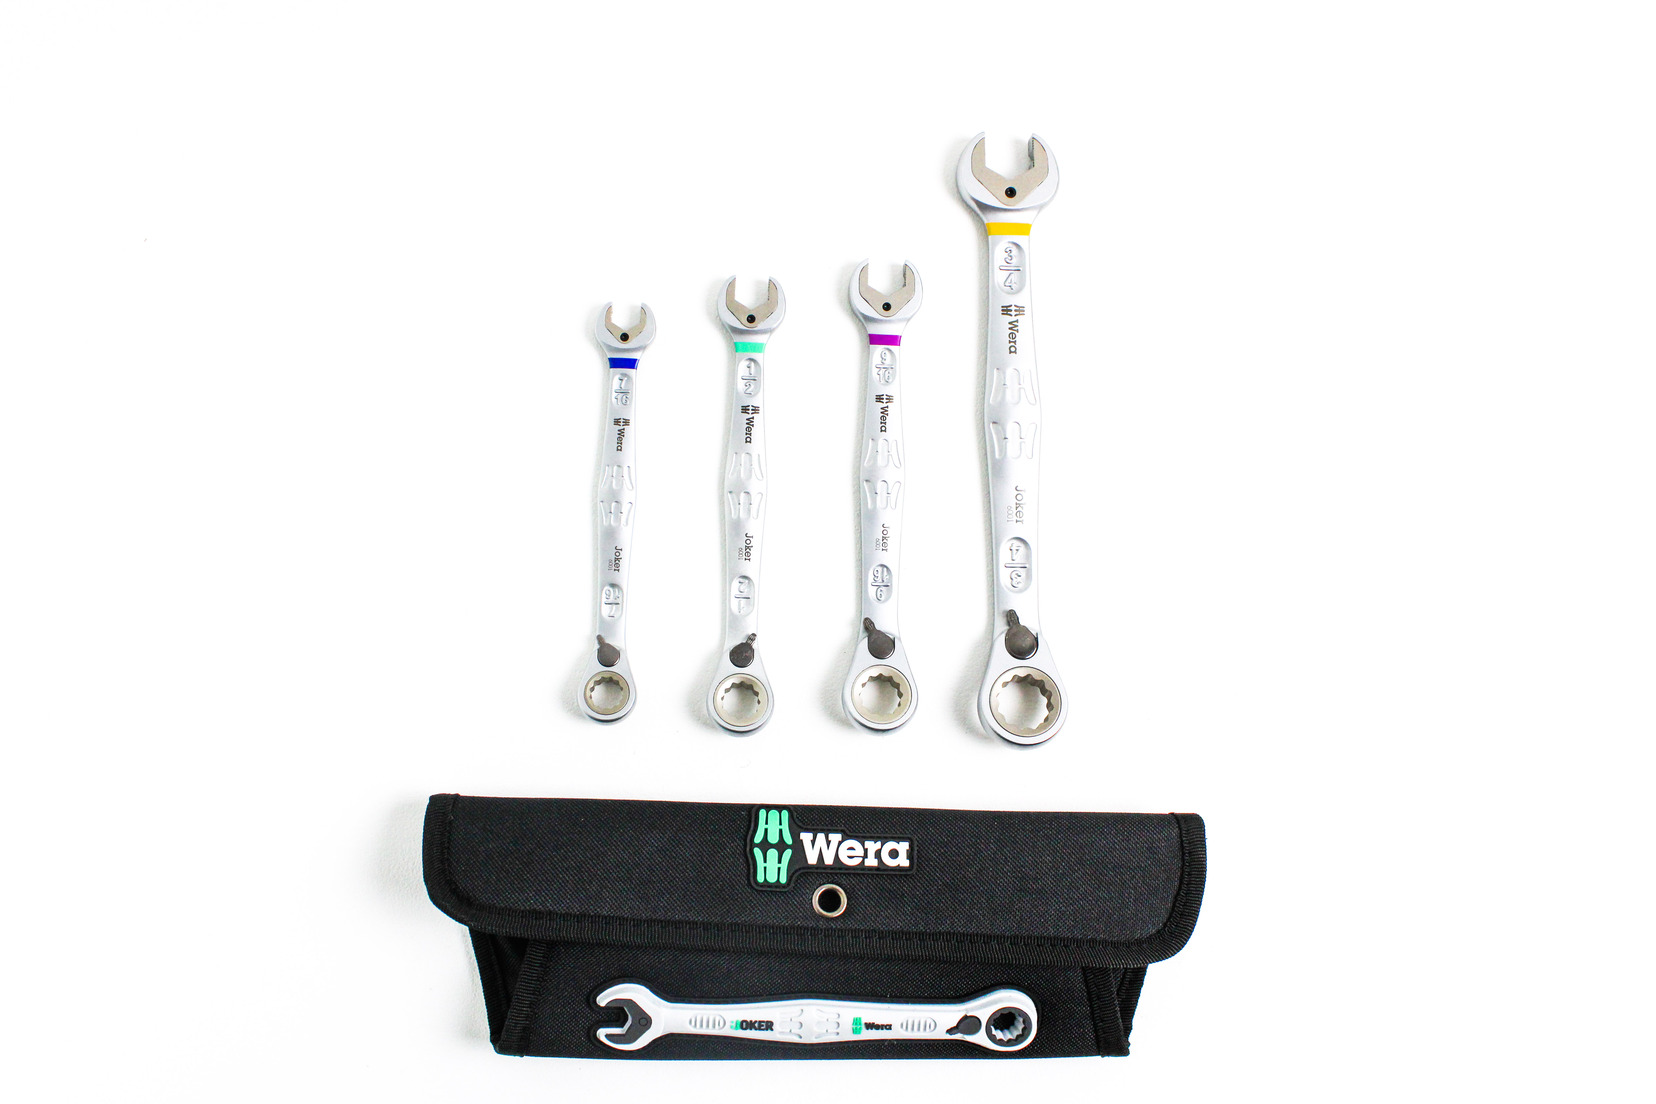 Wera 05020092001 0 Joker Ratchet Set For Switch Combination Wrench Imperial  4 Piece